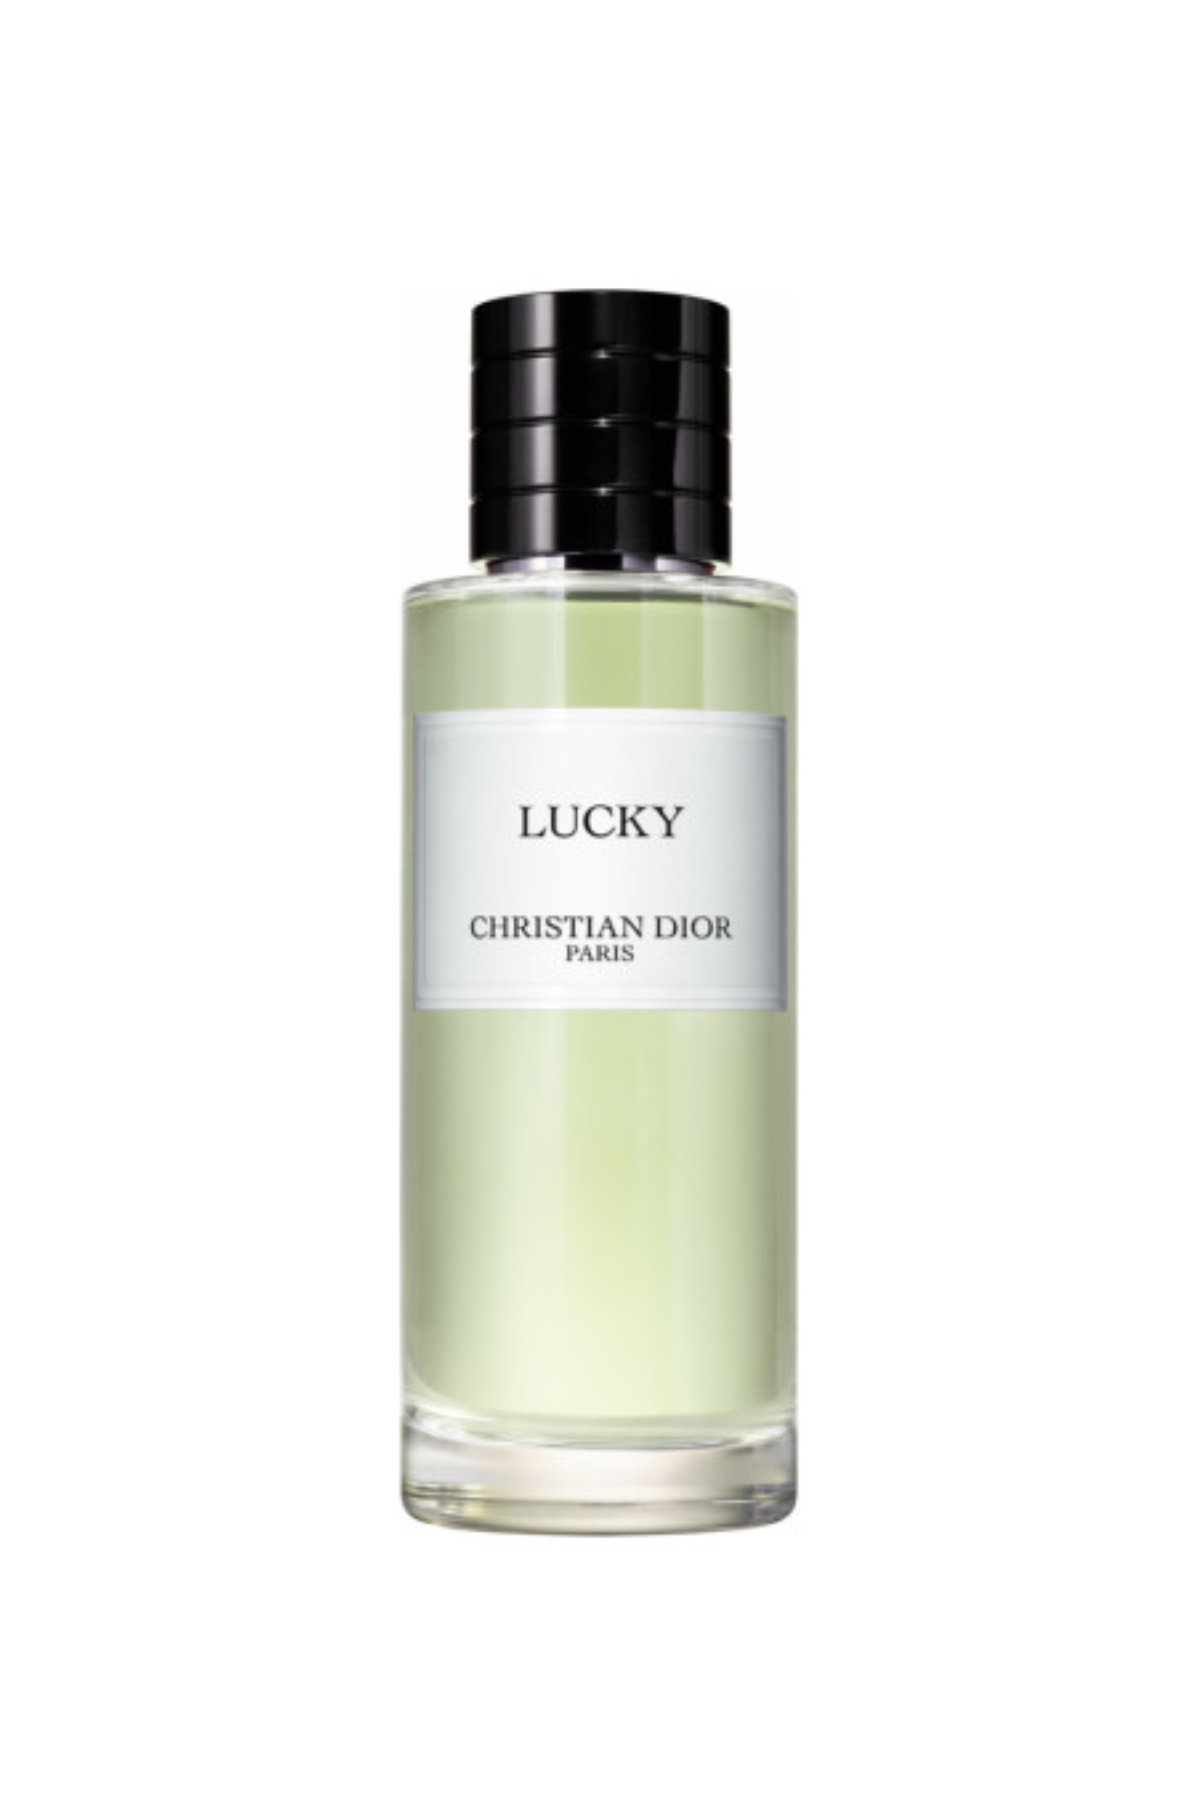 A bottle of Christian Dior Lucky Perfume against a white background.